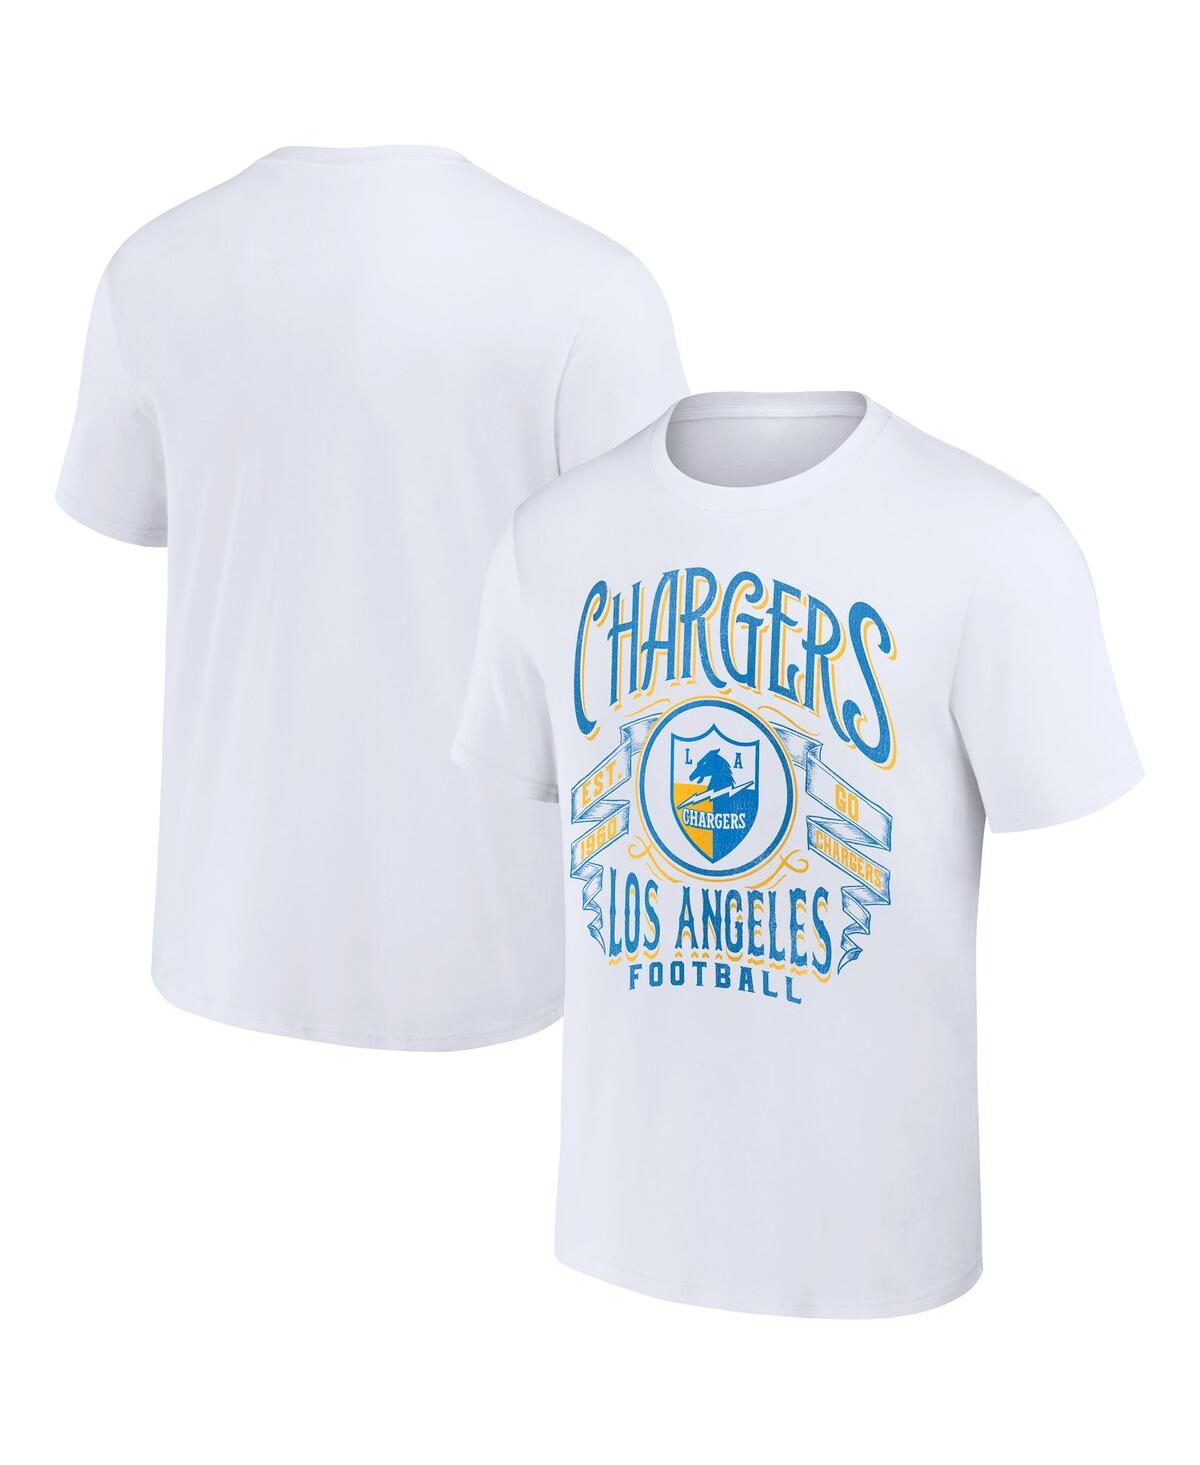 Fanatics Men's Nfl X Darius Rucker Collection By  White Los Angeles Chargers Vintage-like Football T-